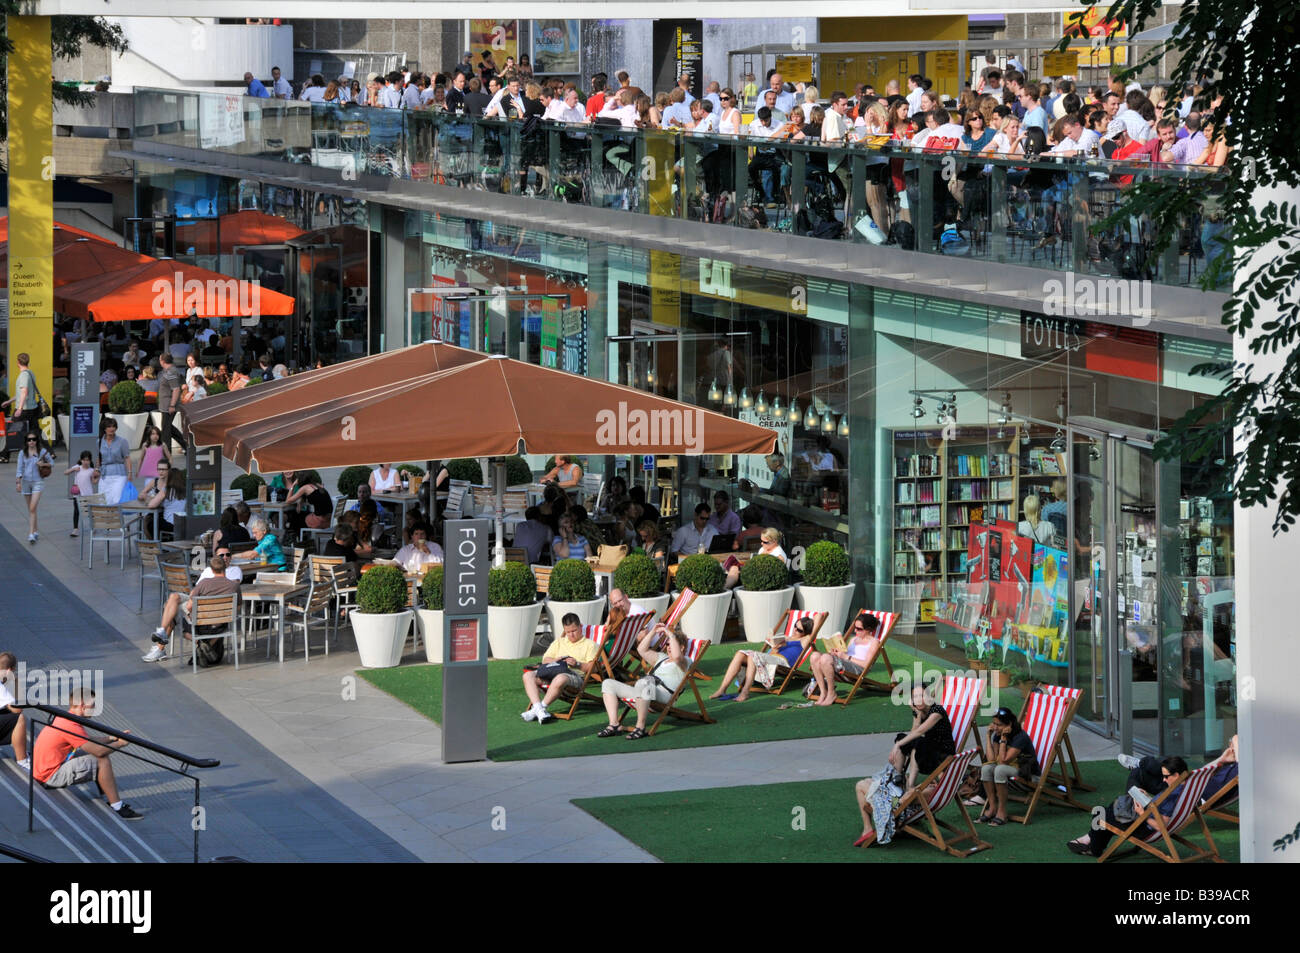 Summer lunch time people at Foyles bookshop in deckchairs & on Royal Festival Hall terrace at the riverside South bank beside River Thames London UK Stock Photo